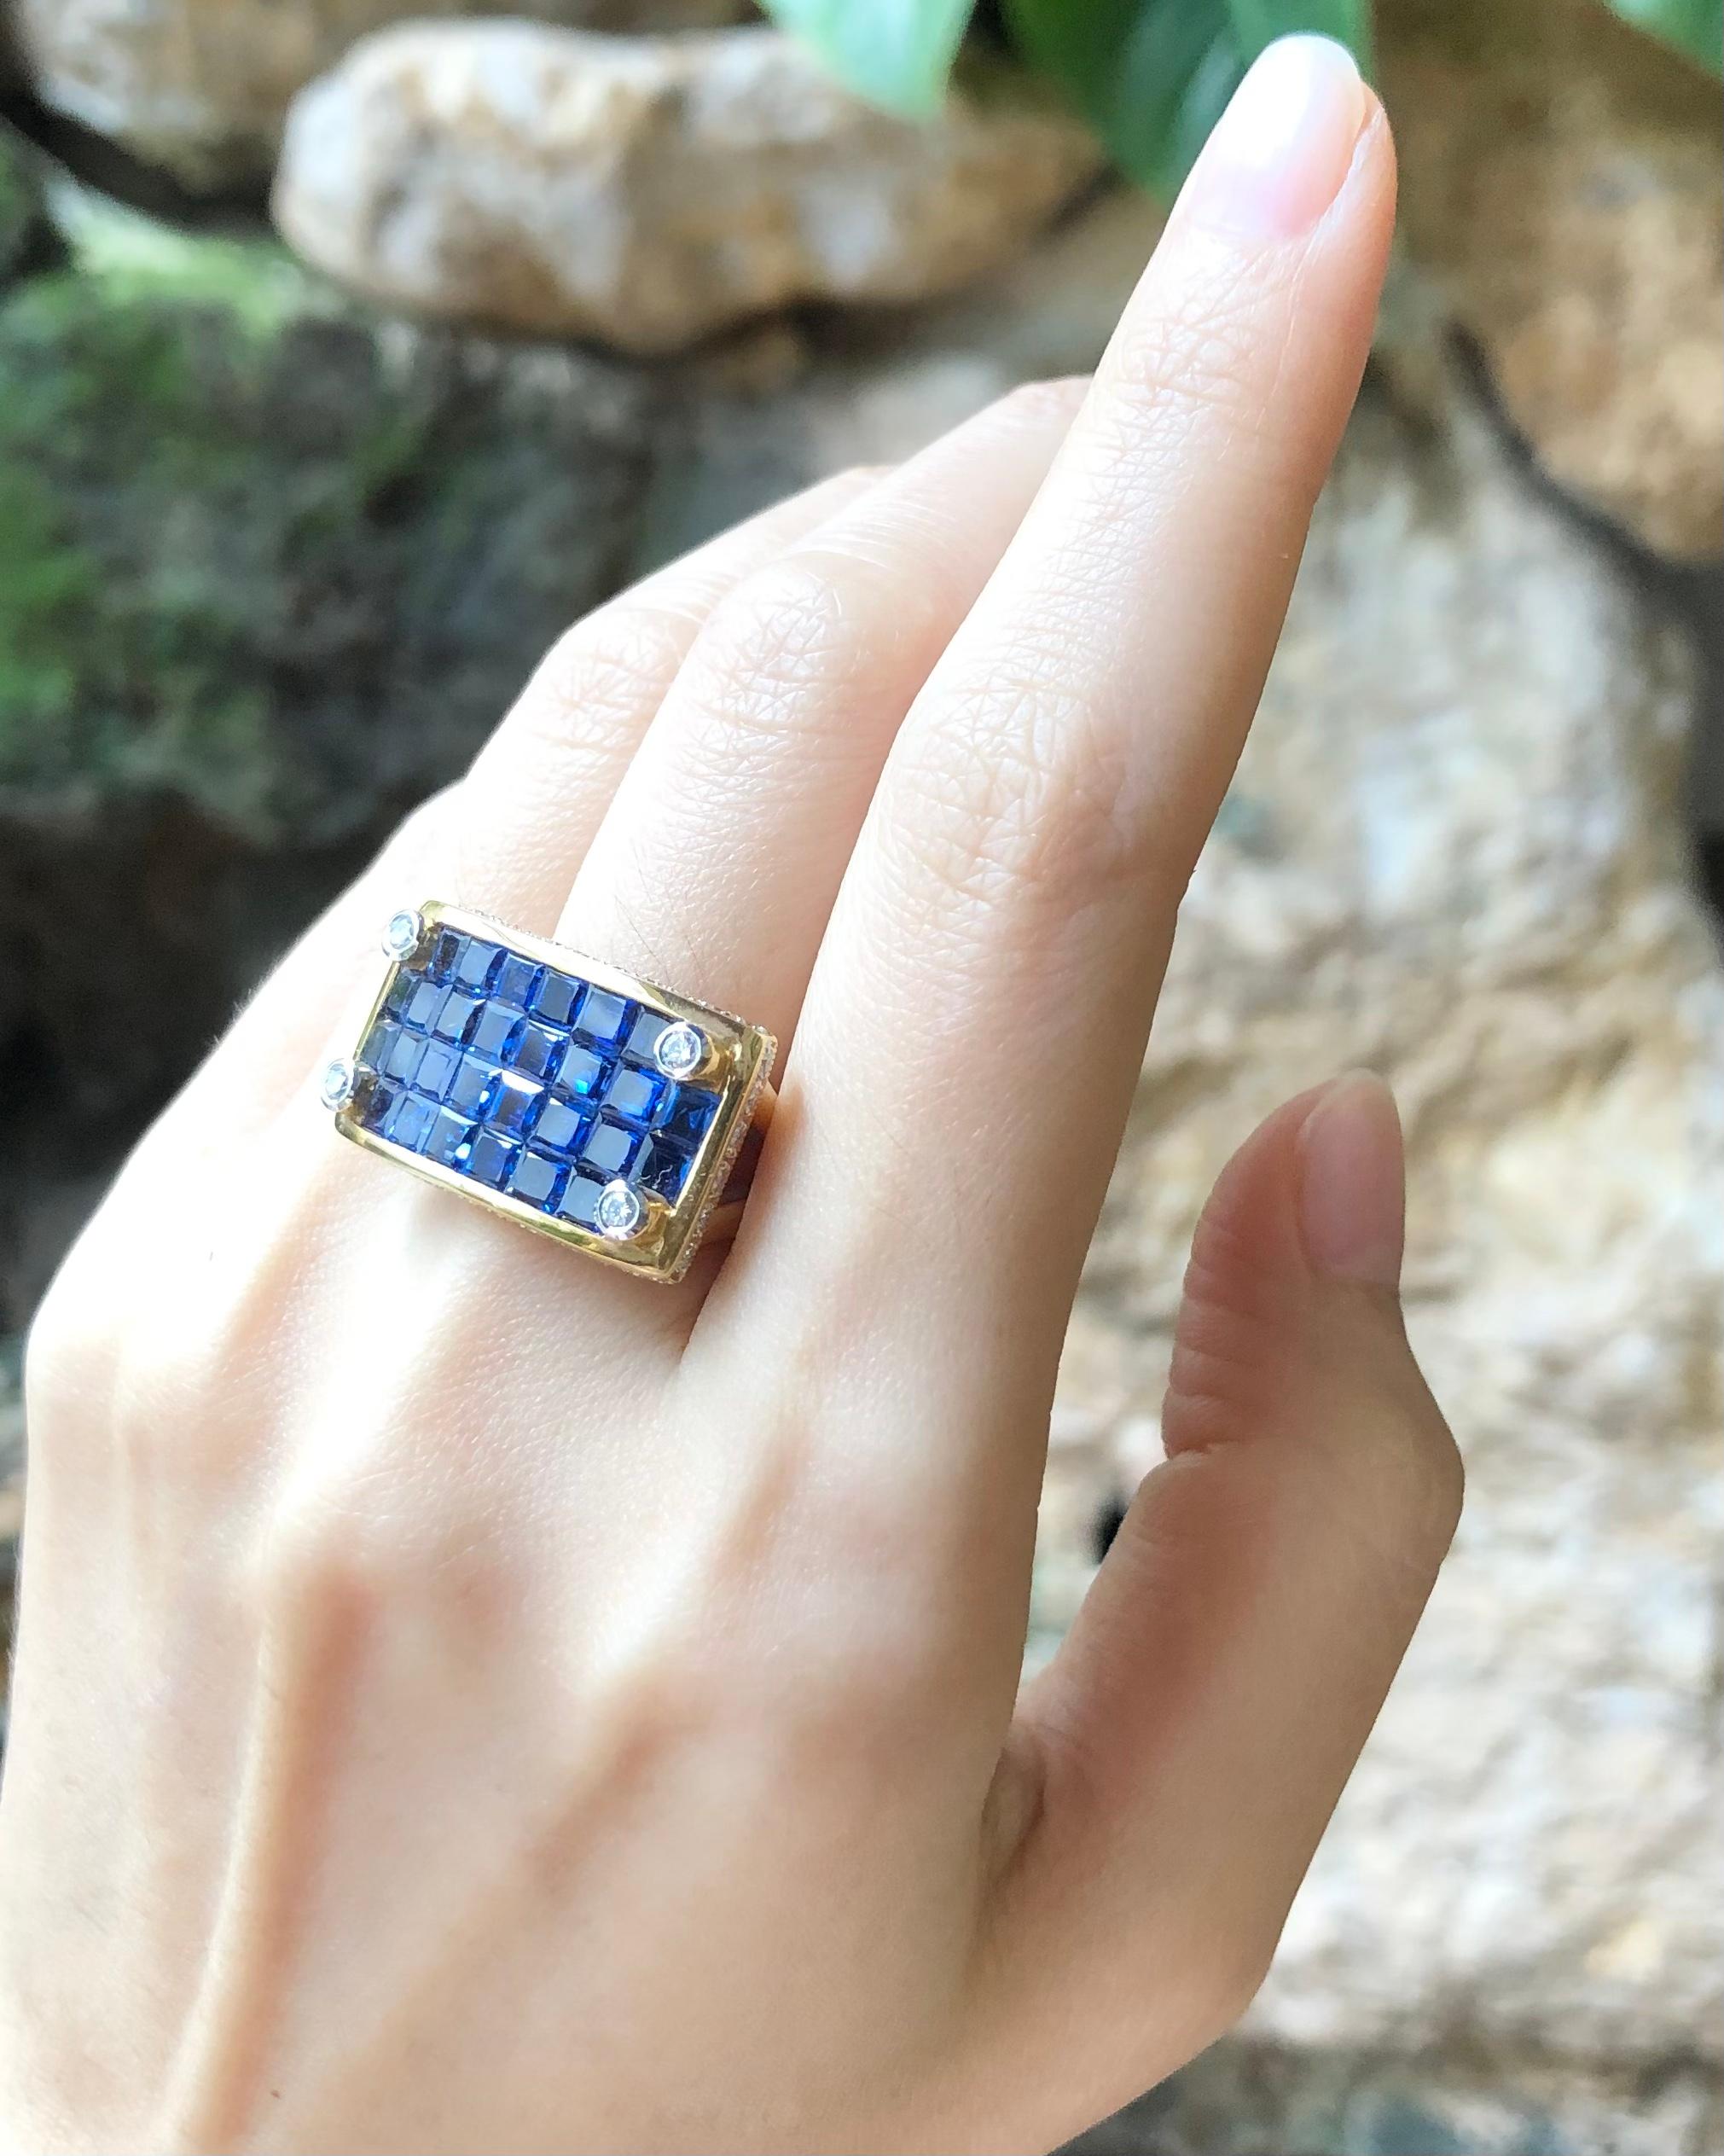 Blue Sapphire 6.03 carats with Diamond 0.64 carat Ring set in 18 Karat Gold Settings

Width:  2.5 cm 
Length: 1.4 cm
Ring Size: 50
Total Weight: 16.3 grams


